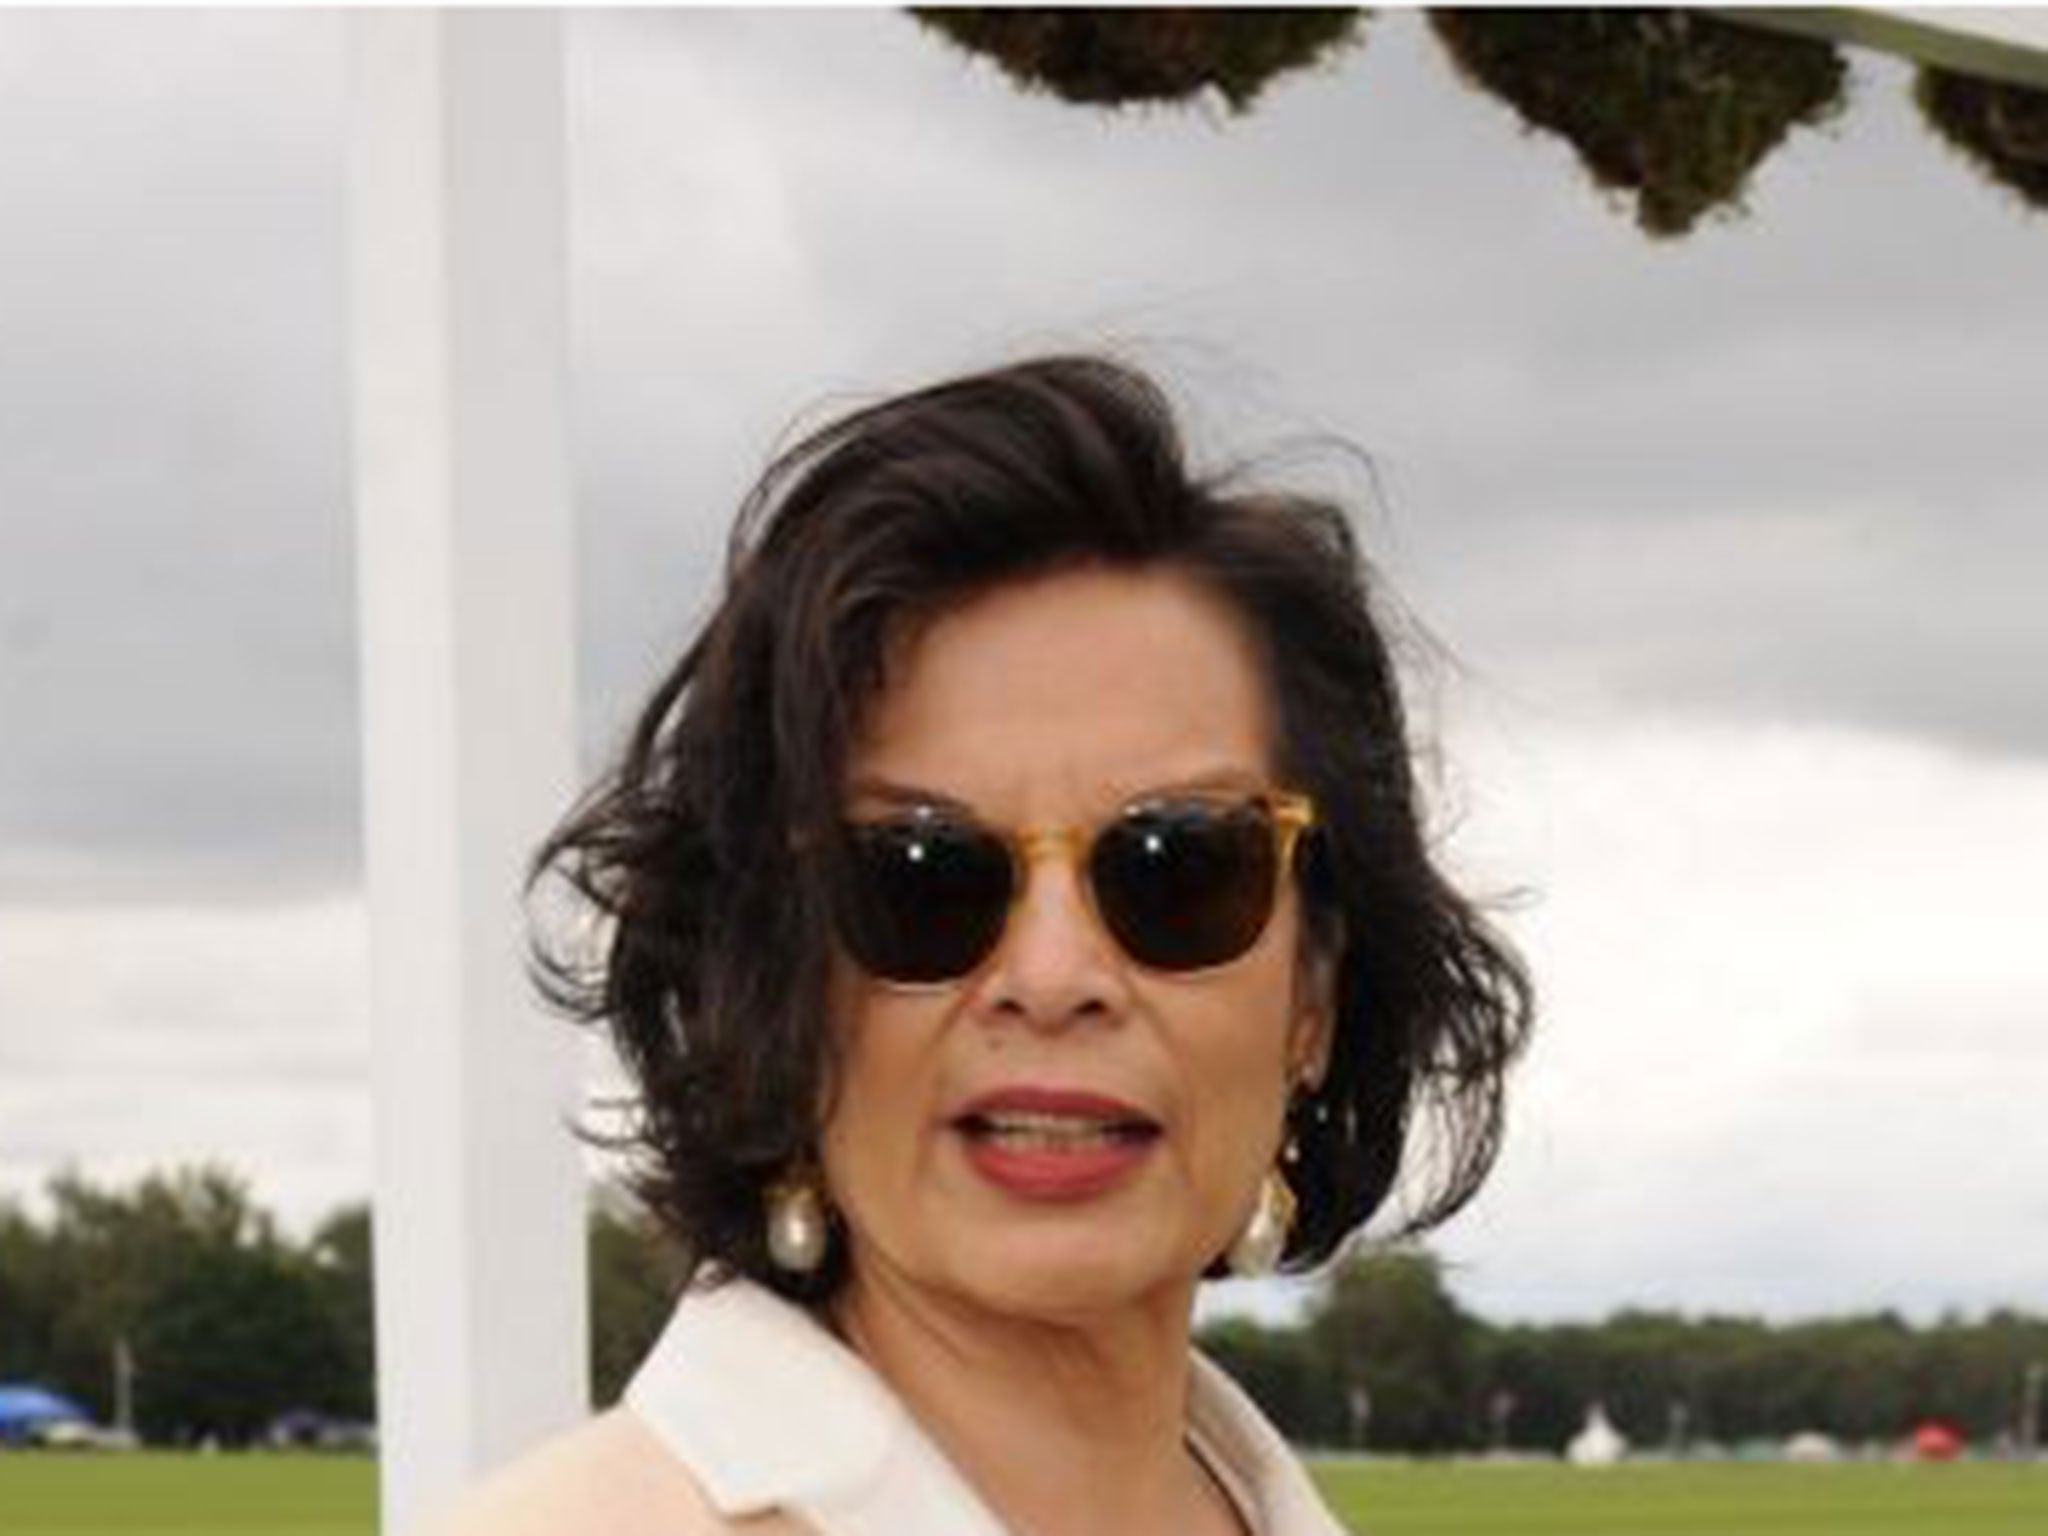 Celebrity protesters such as anti-fracking crusader Bianca Jagger are distorting the BBC’s coverage of rural affairs, a major study commissioned by the BBC Trust has found.